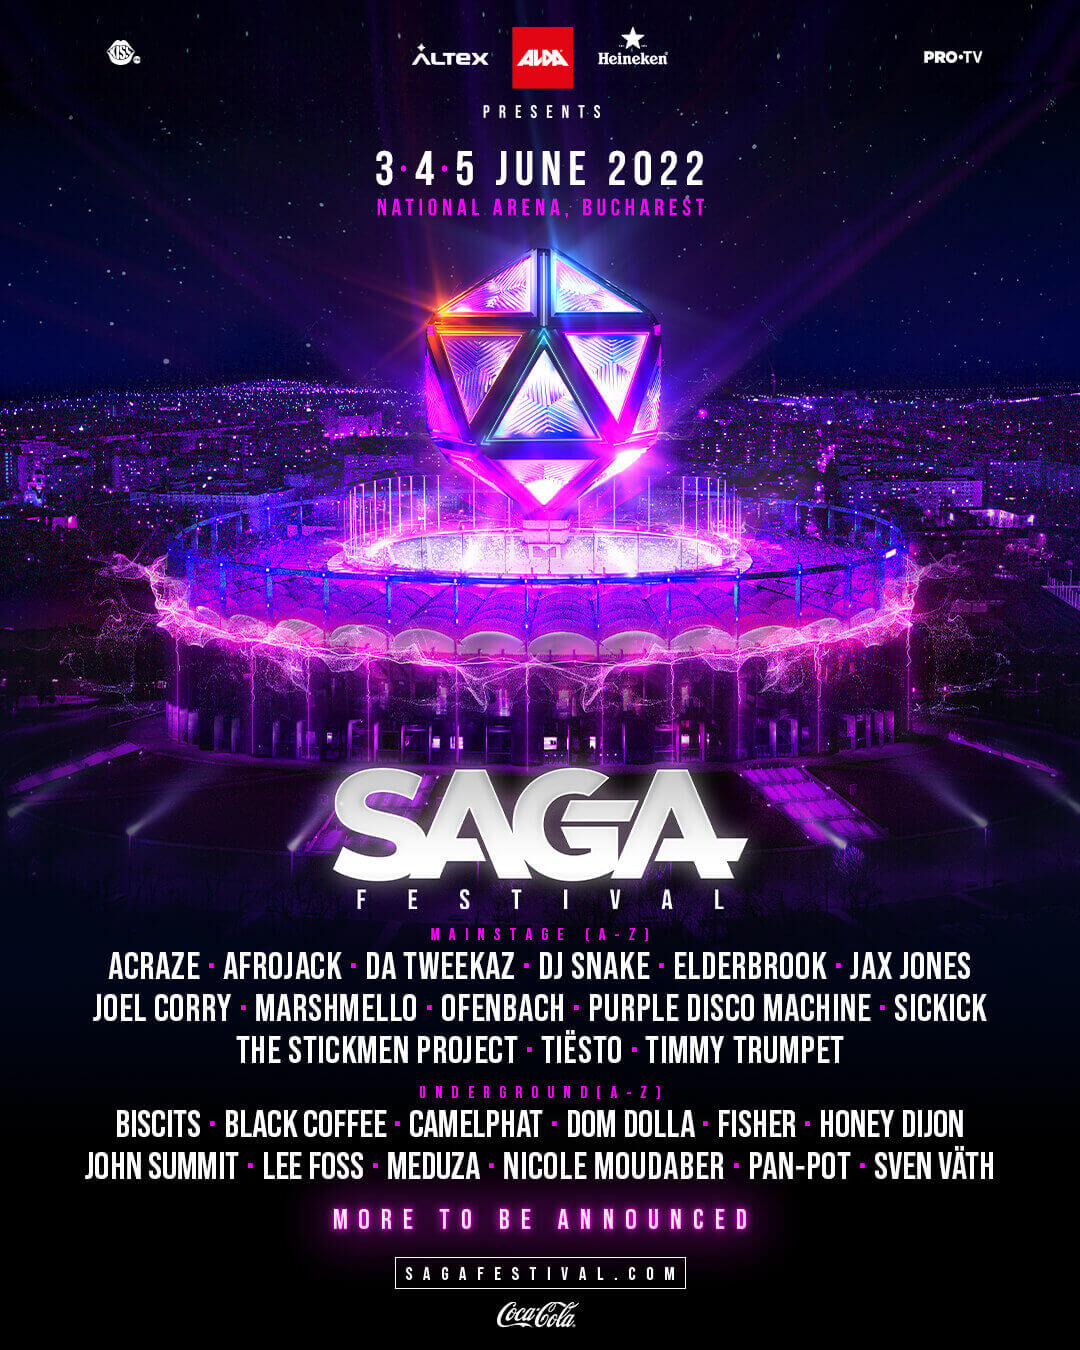 It’s time for the SAGA Festival’s 2nd edition in Romania !